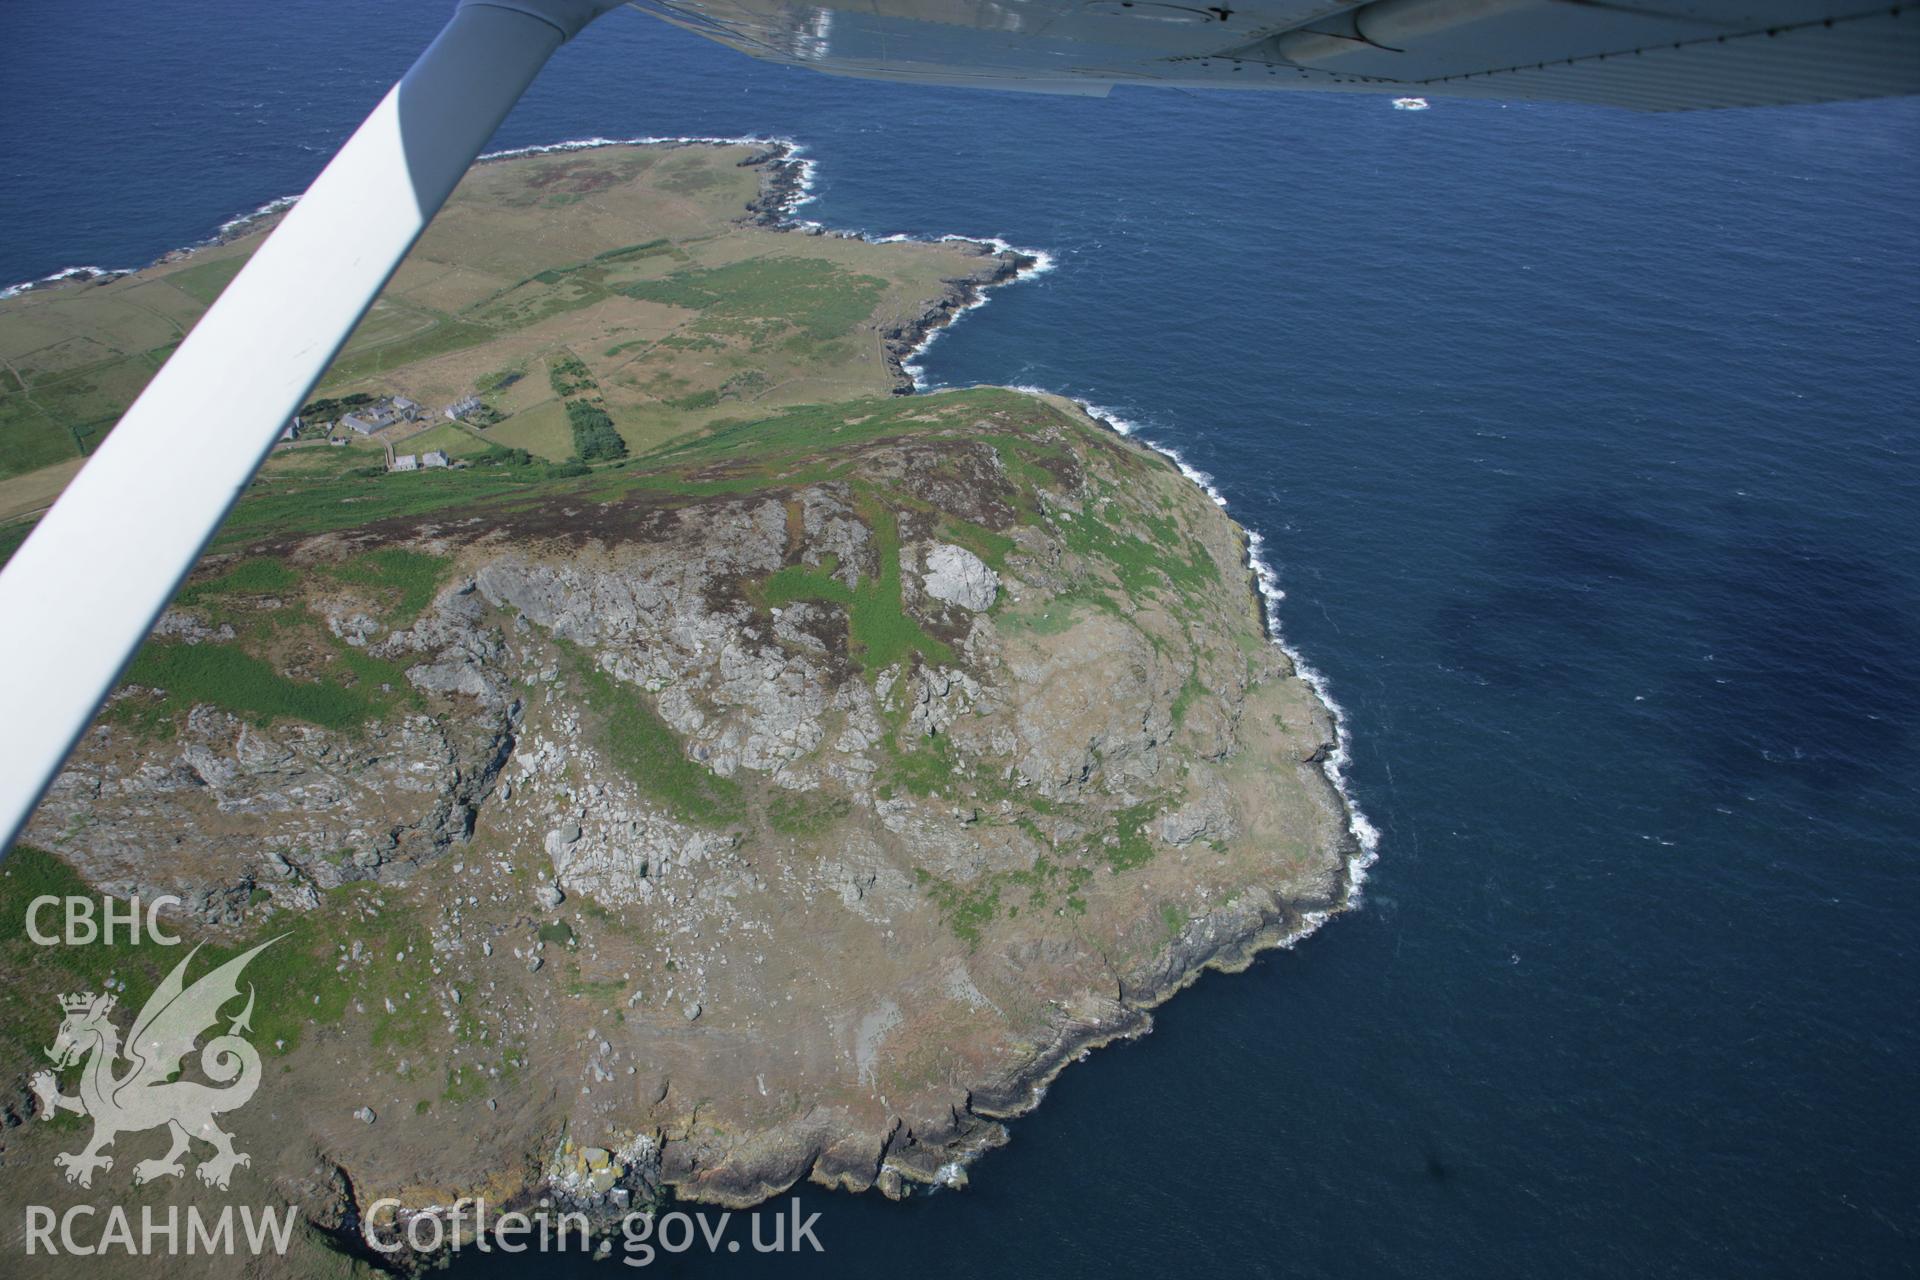 RCAHMW colour oblique aerial photograph of Bardsey Island (Ynys Enlli) showing the northern coast looking west. Taken on 03 August 2006 by Toby Driver.